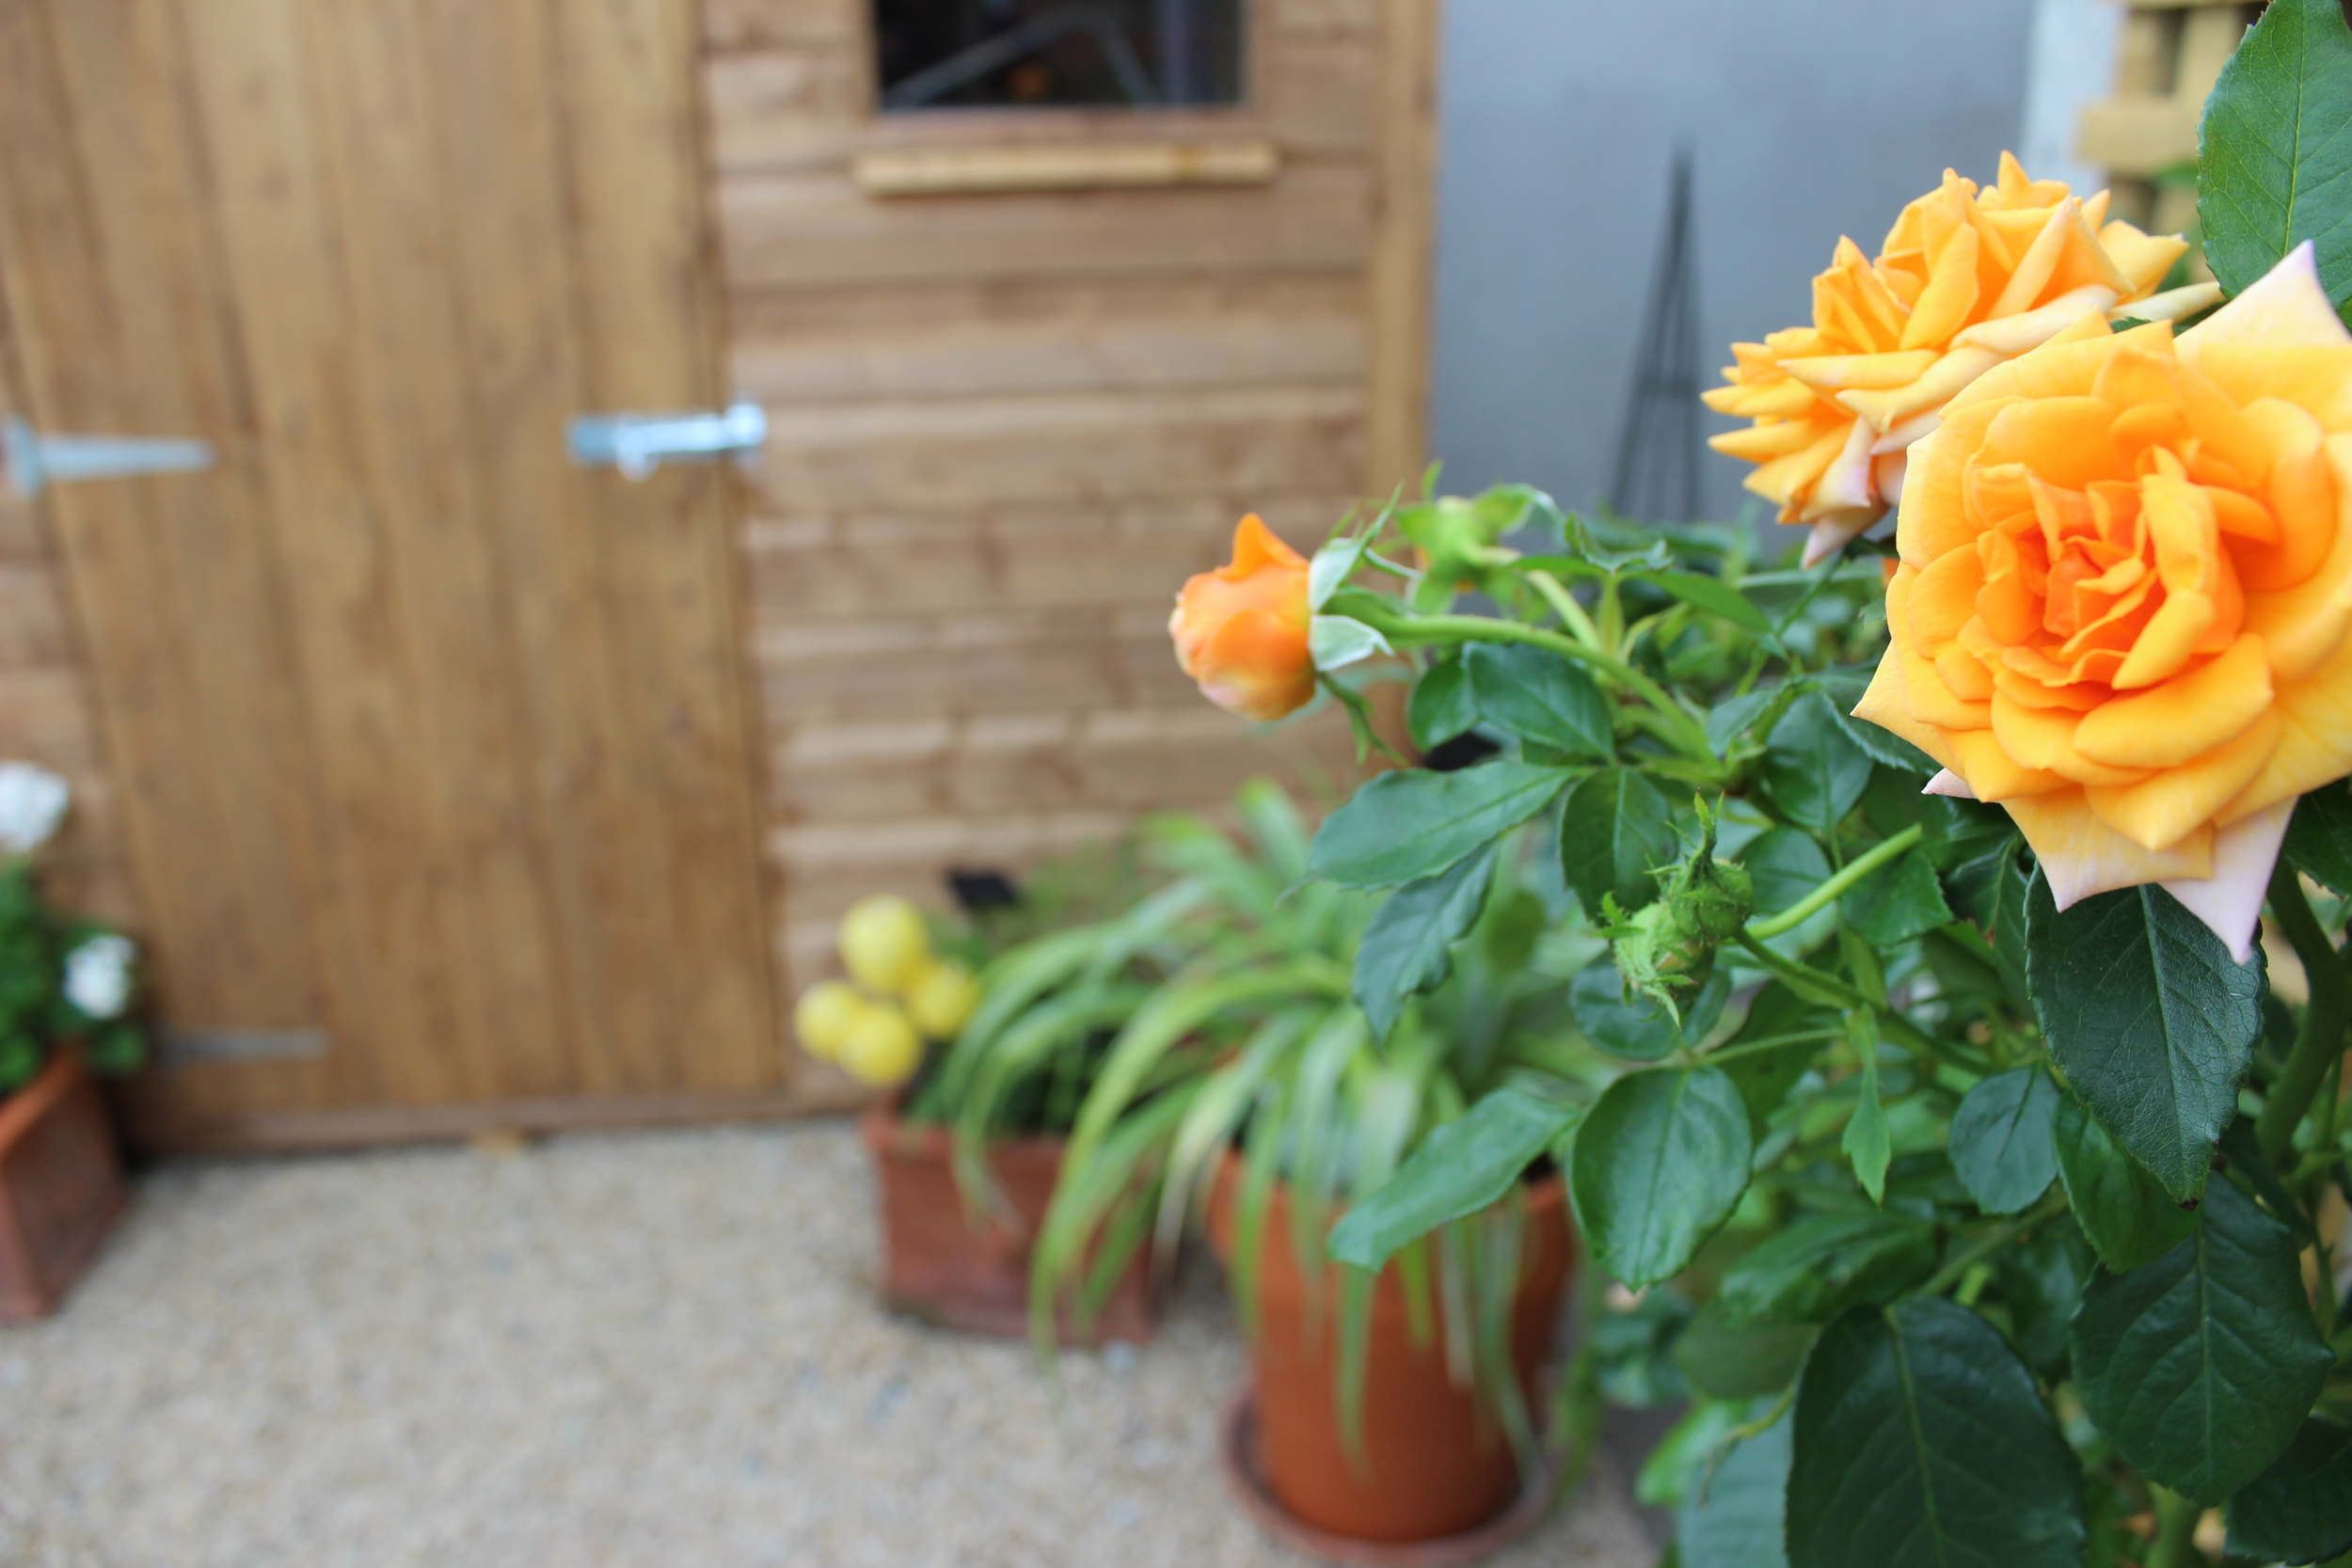 Roses and shed